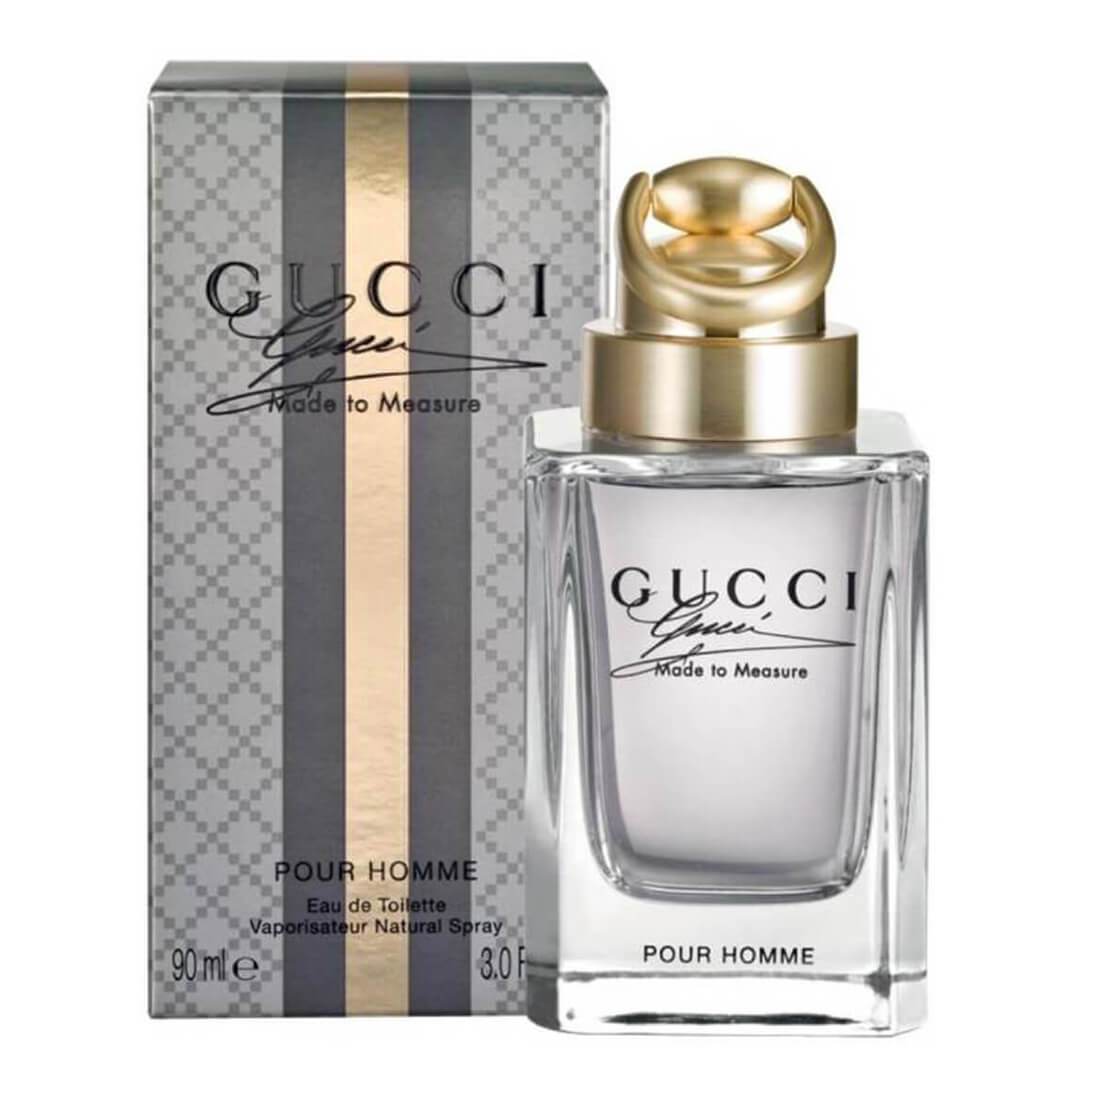 Gucci Made to Measure EDT Perfume For Men - 90ml